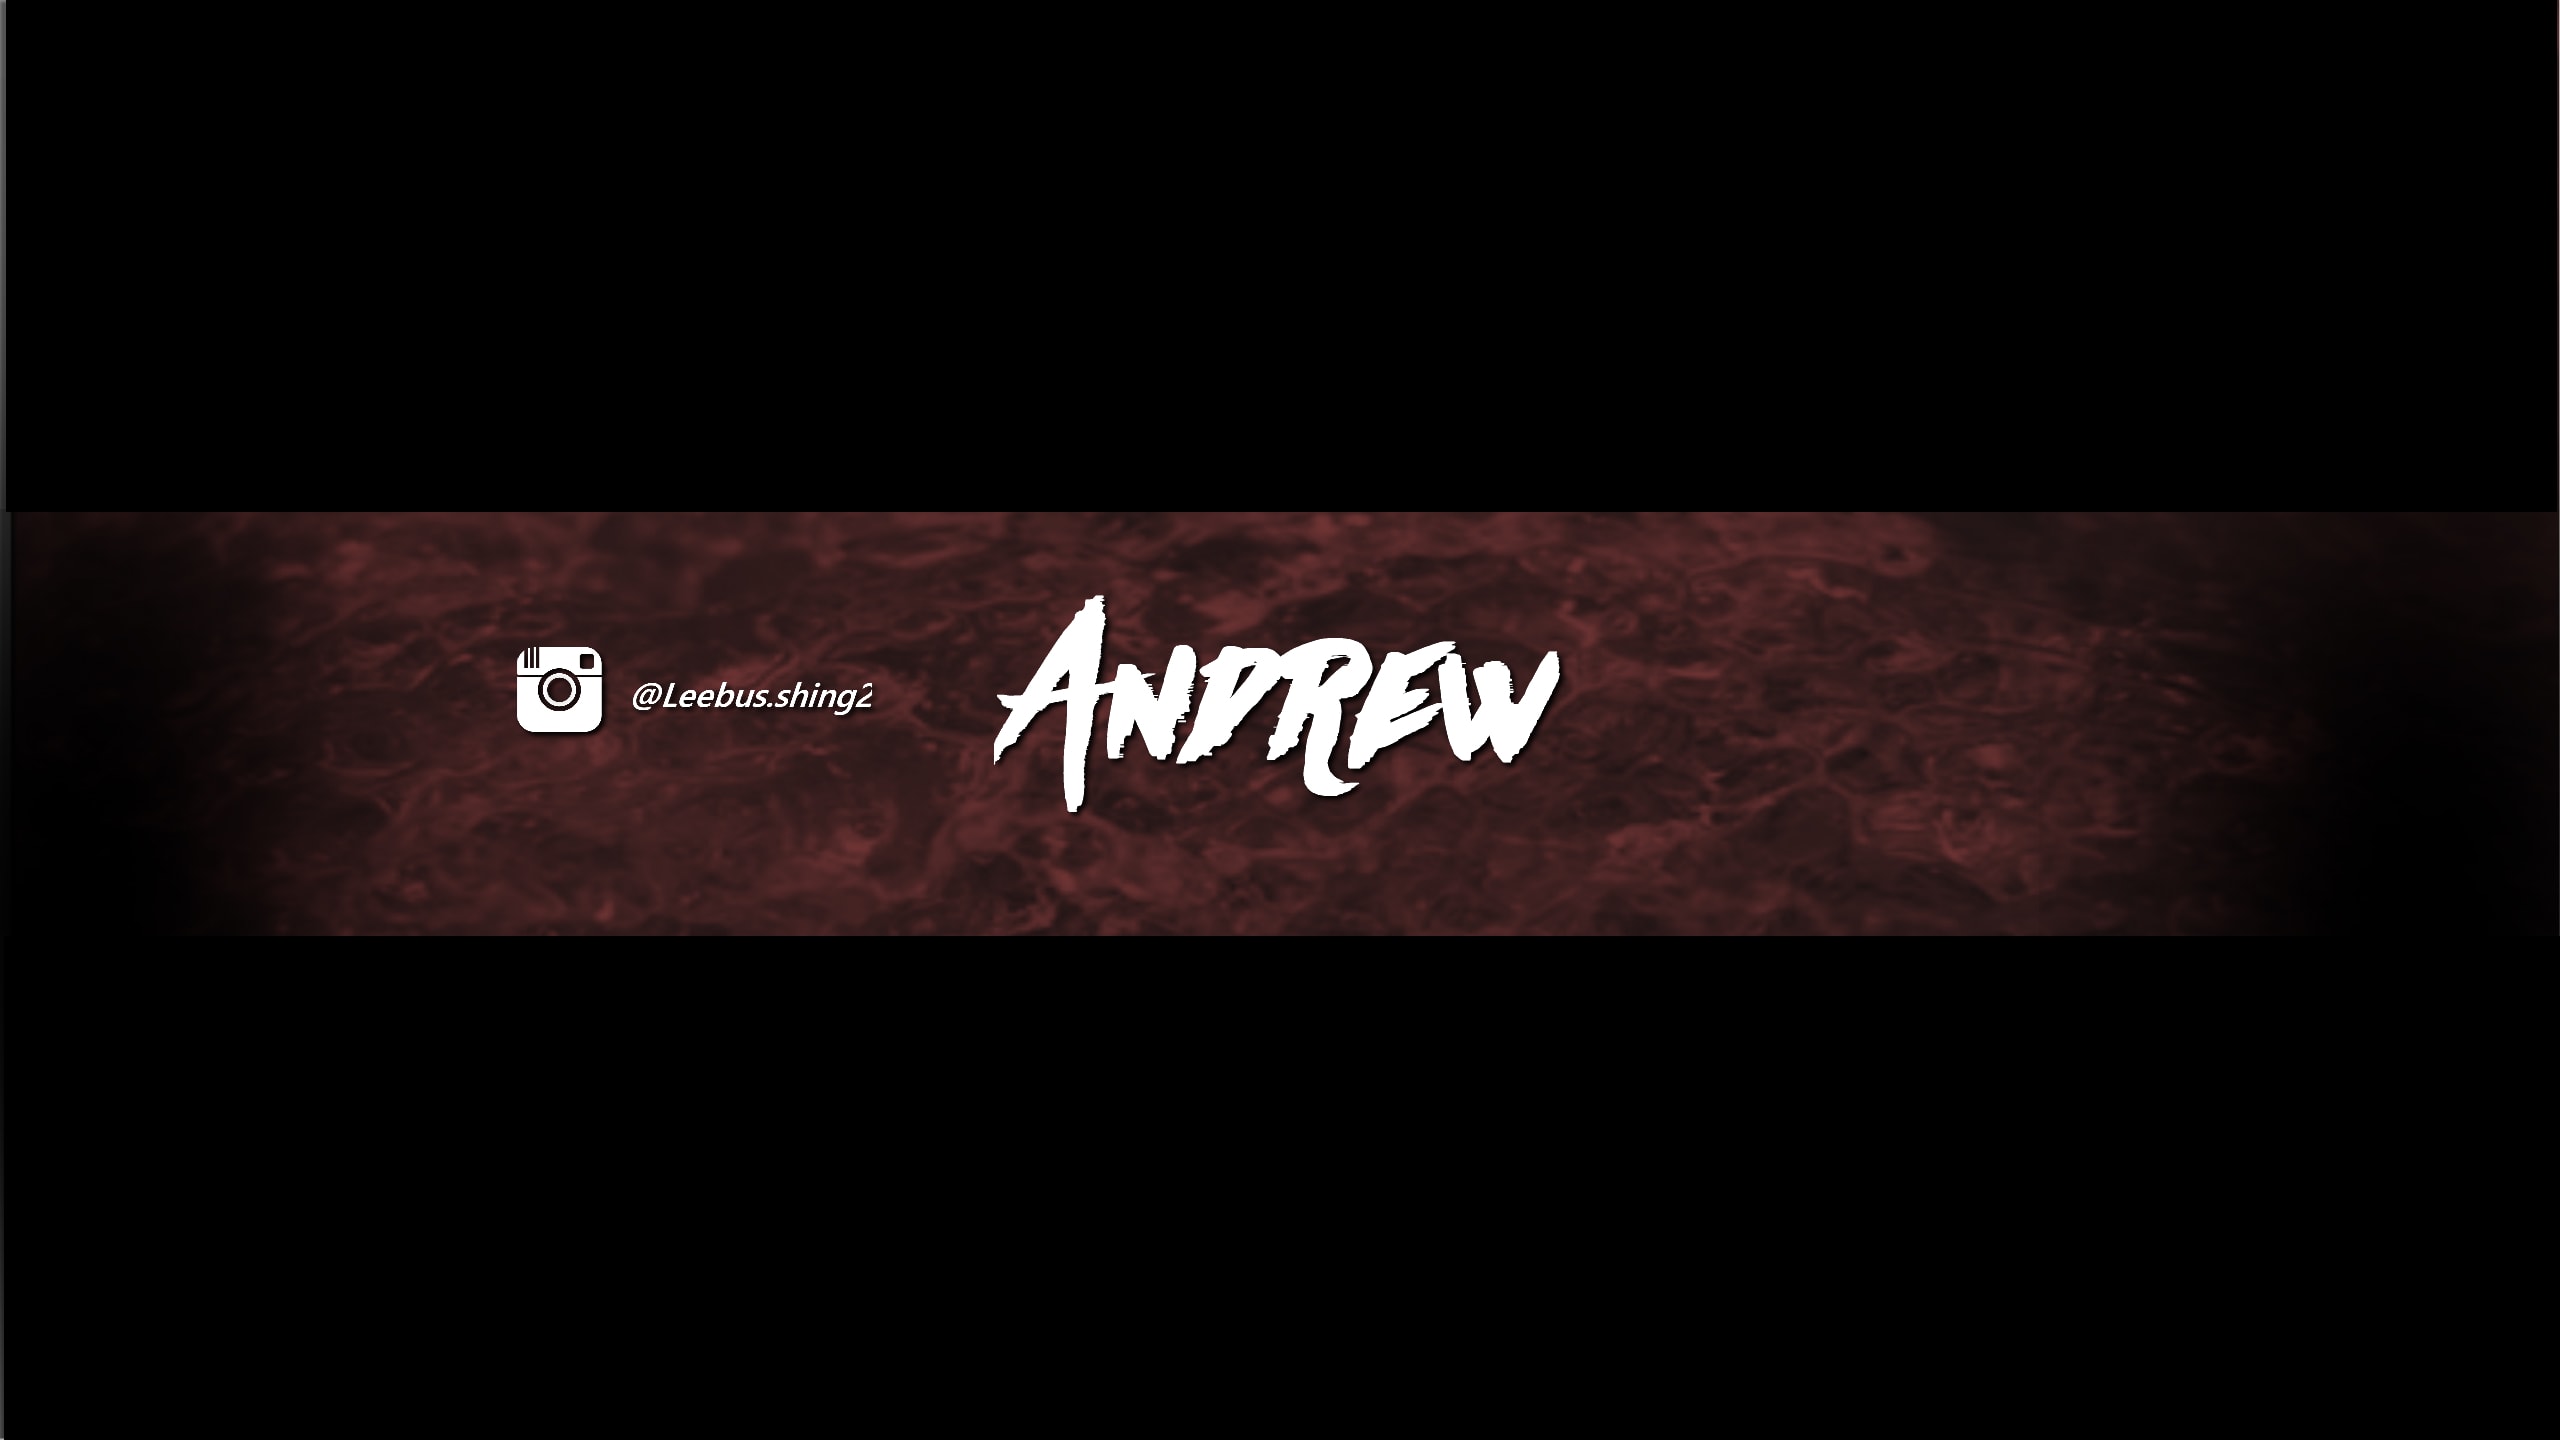 Make You A Cool Youtube Banner By Axdrew1400